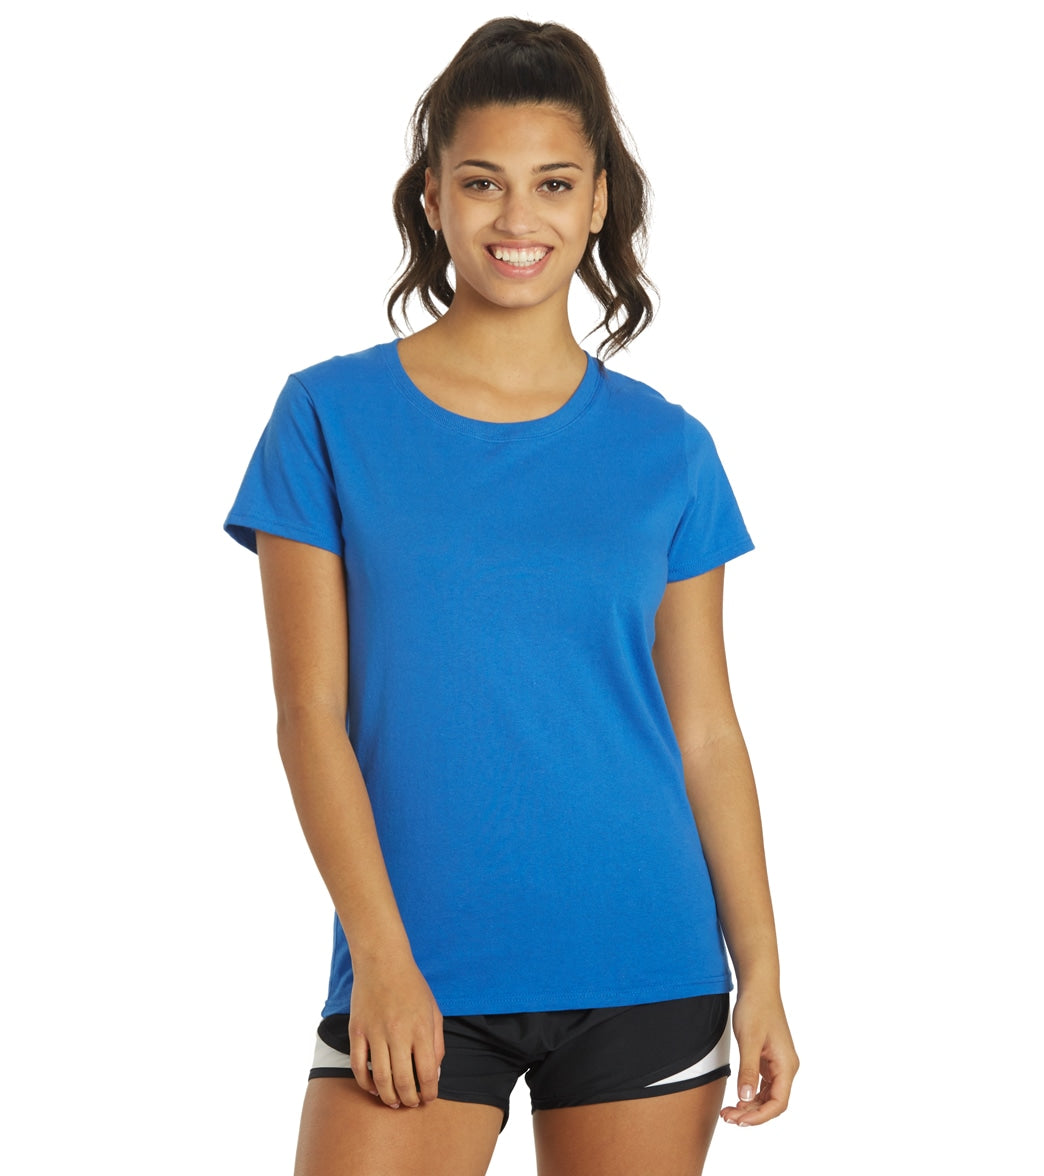 Women's Cotton Missy Fit T-Shirt - Royal Small Size Small - Swimoutlet.com